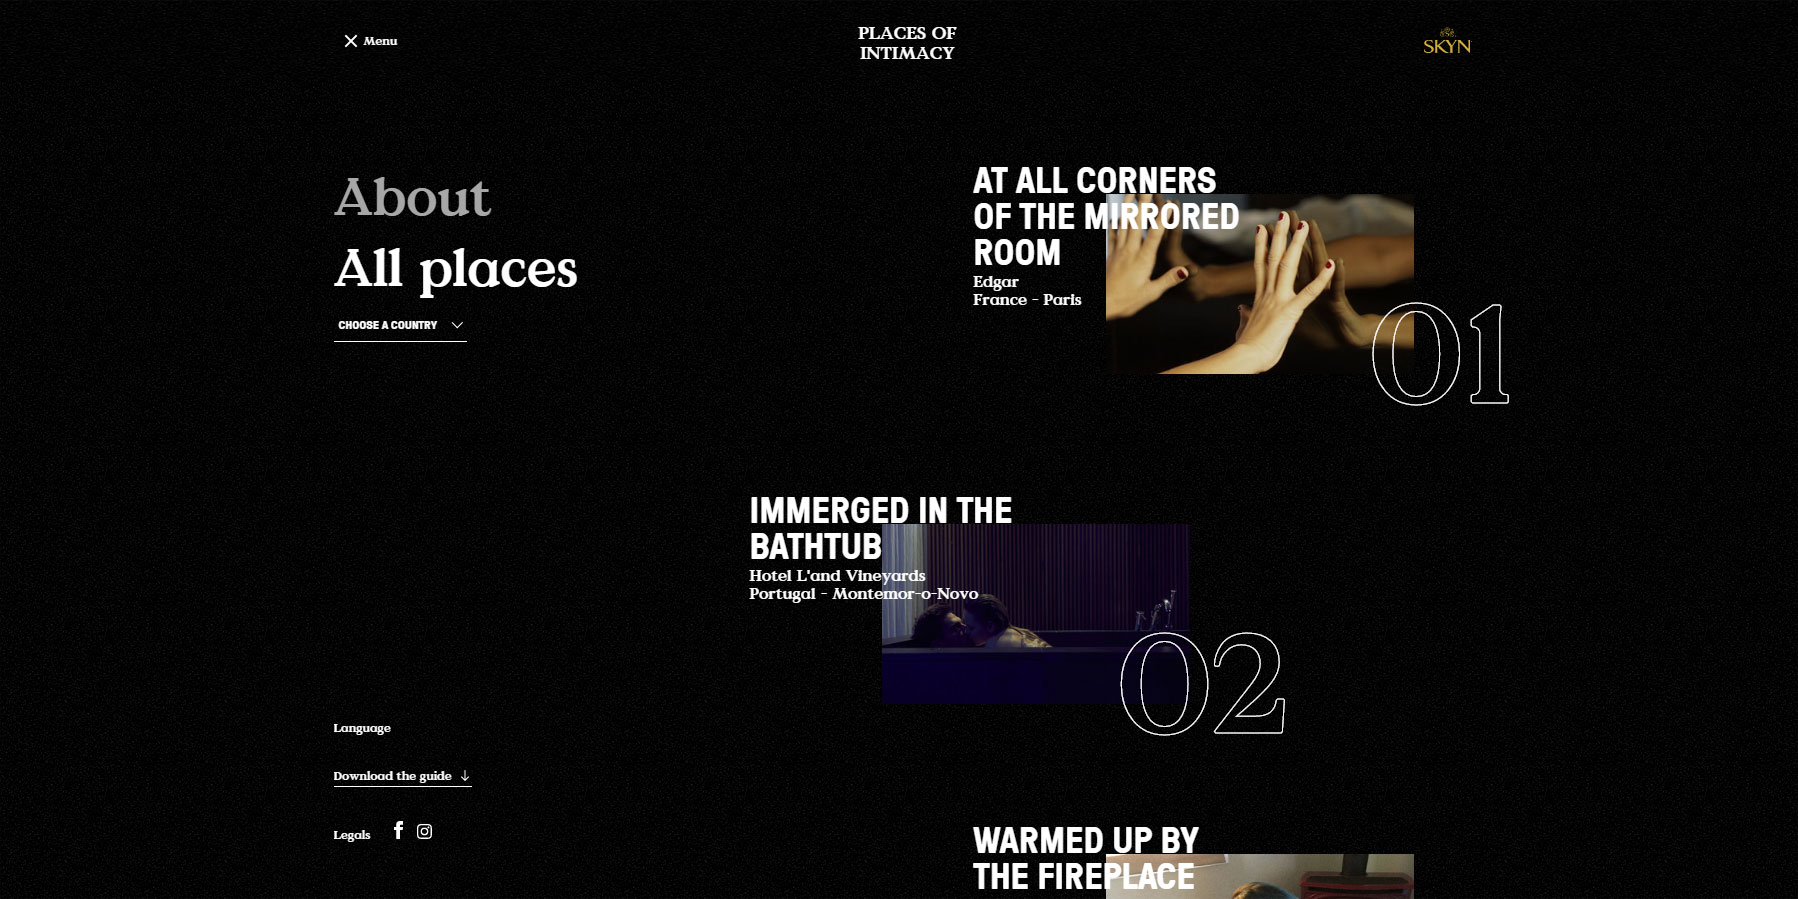 Places of intimacy - Website of the Day